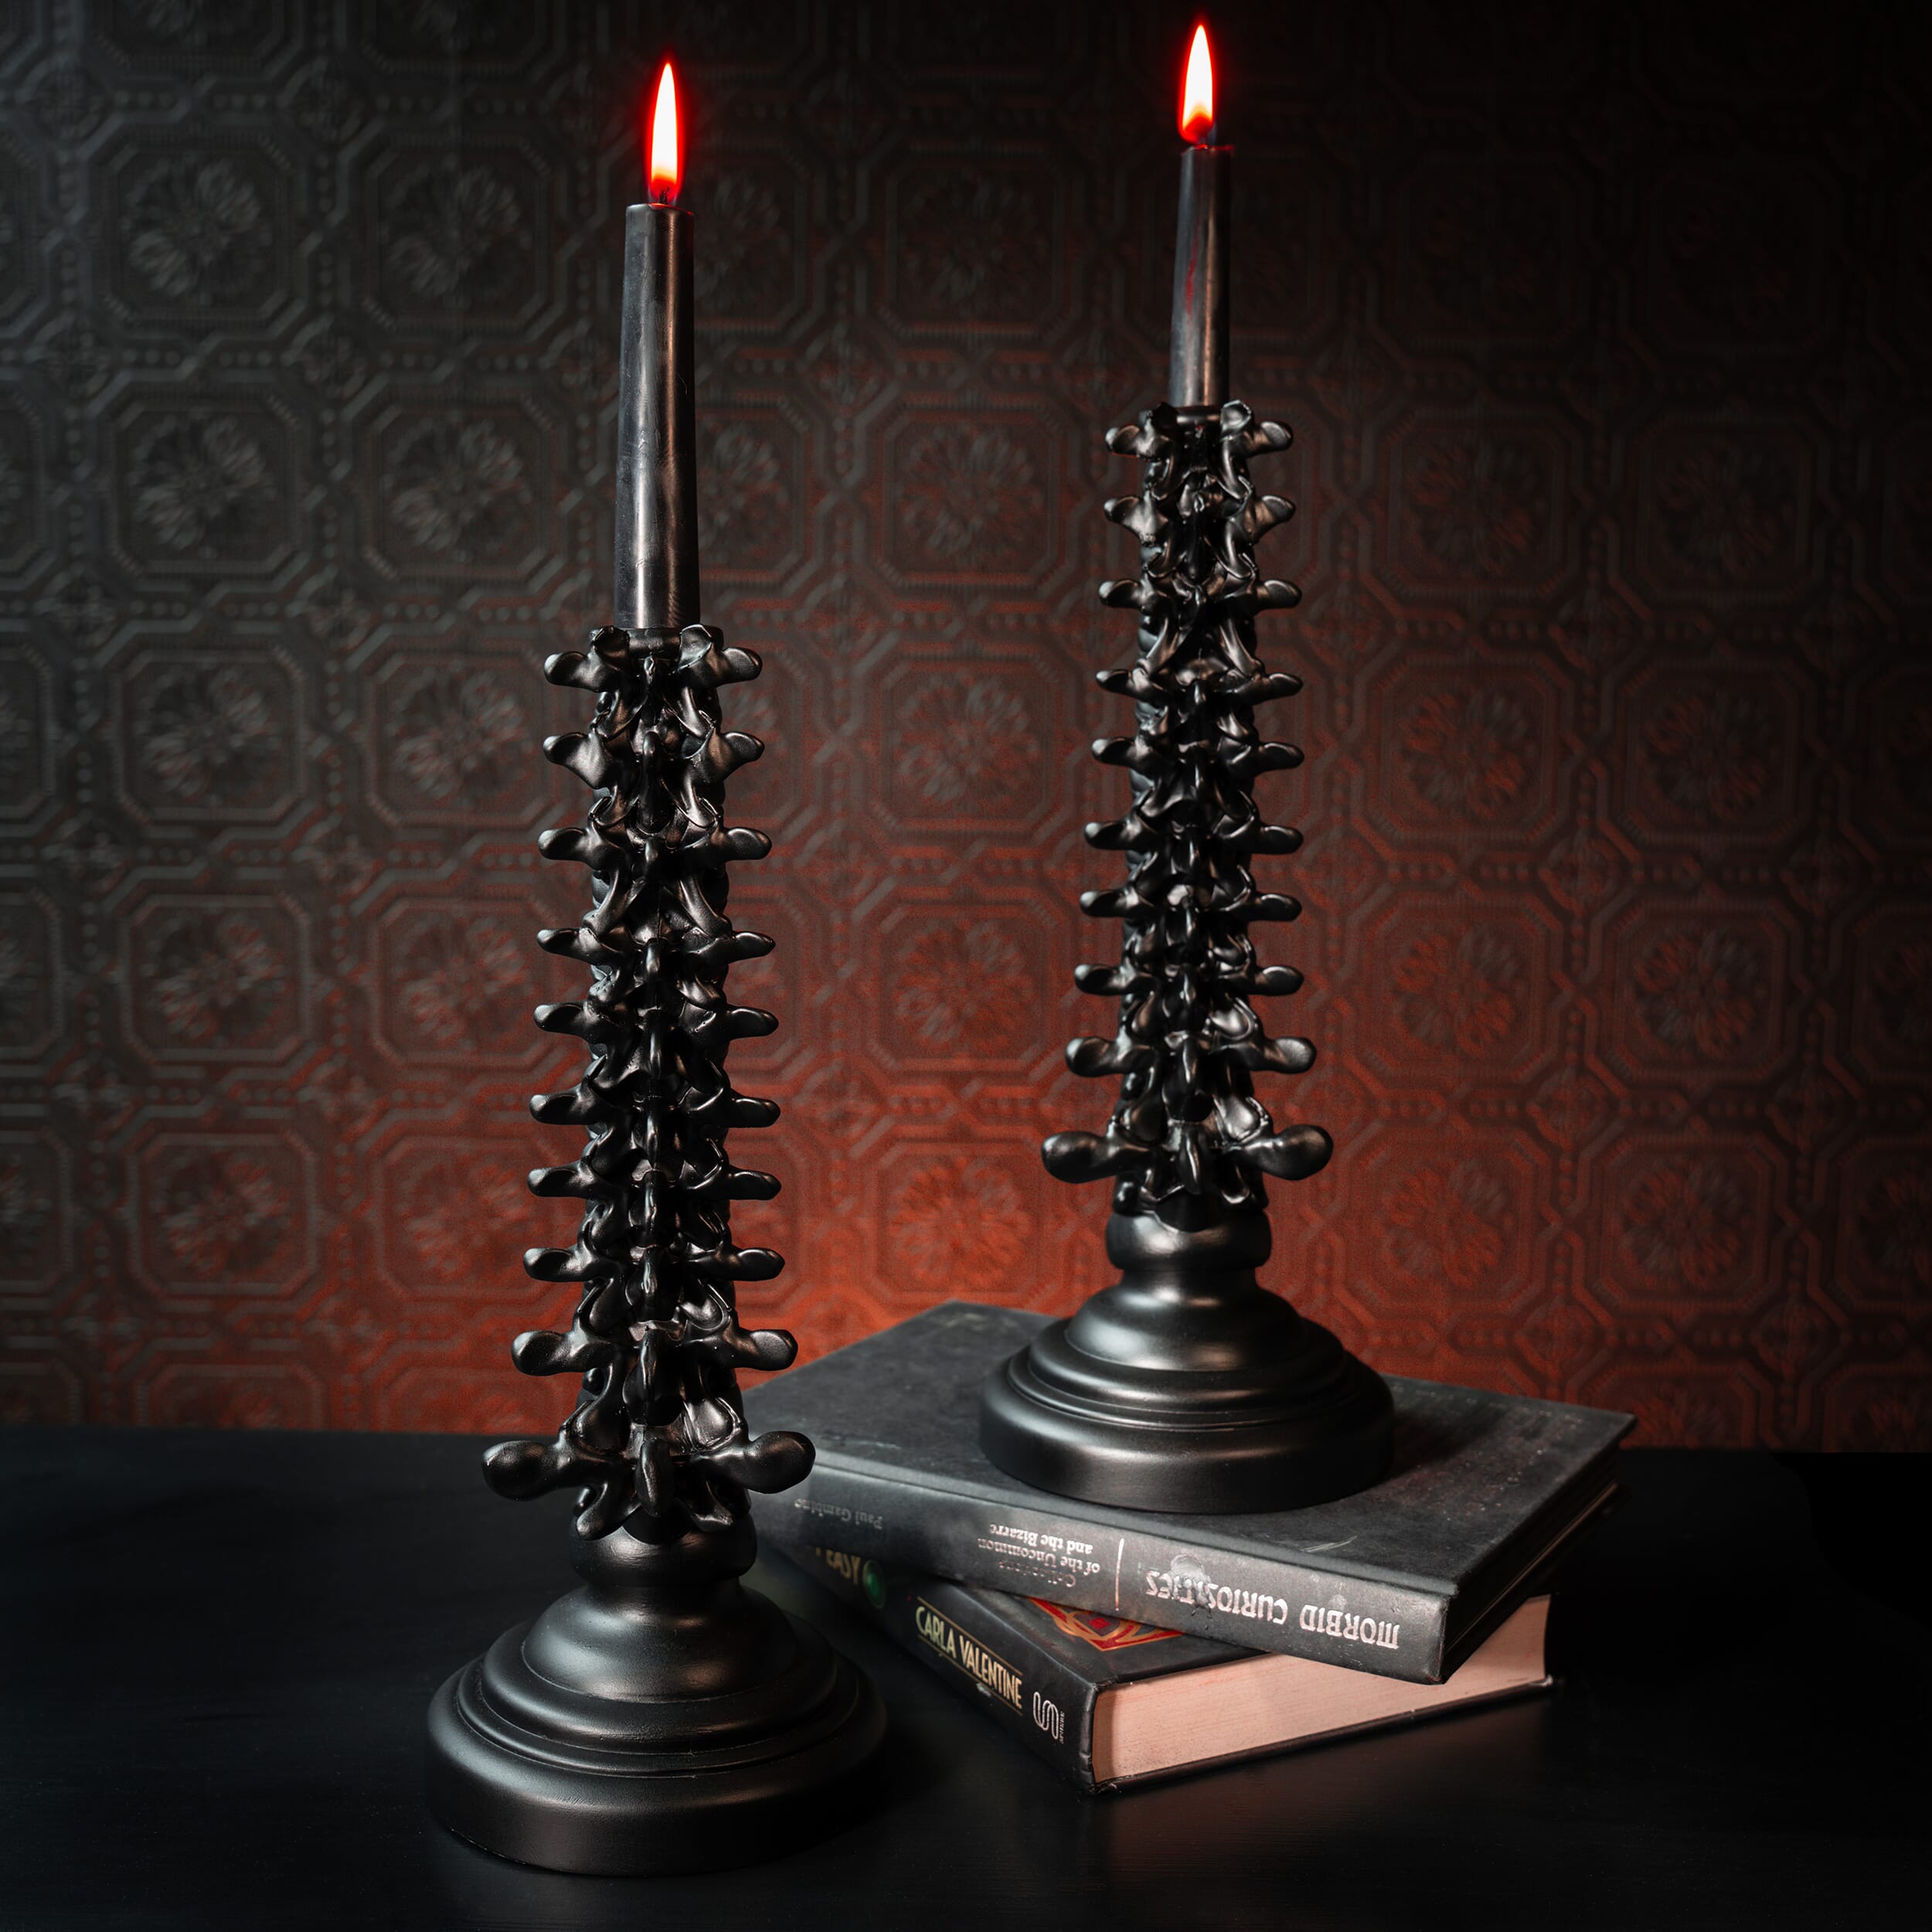 spine candle holder the blackened teeth gothic home decor